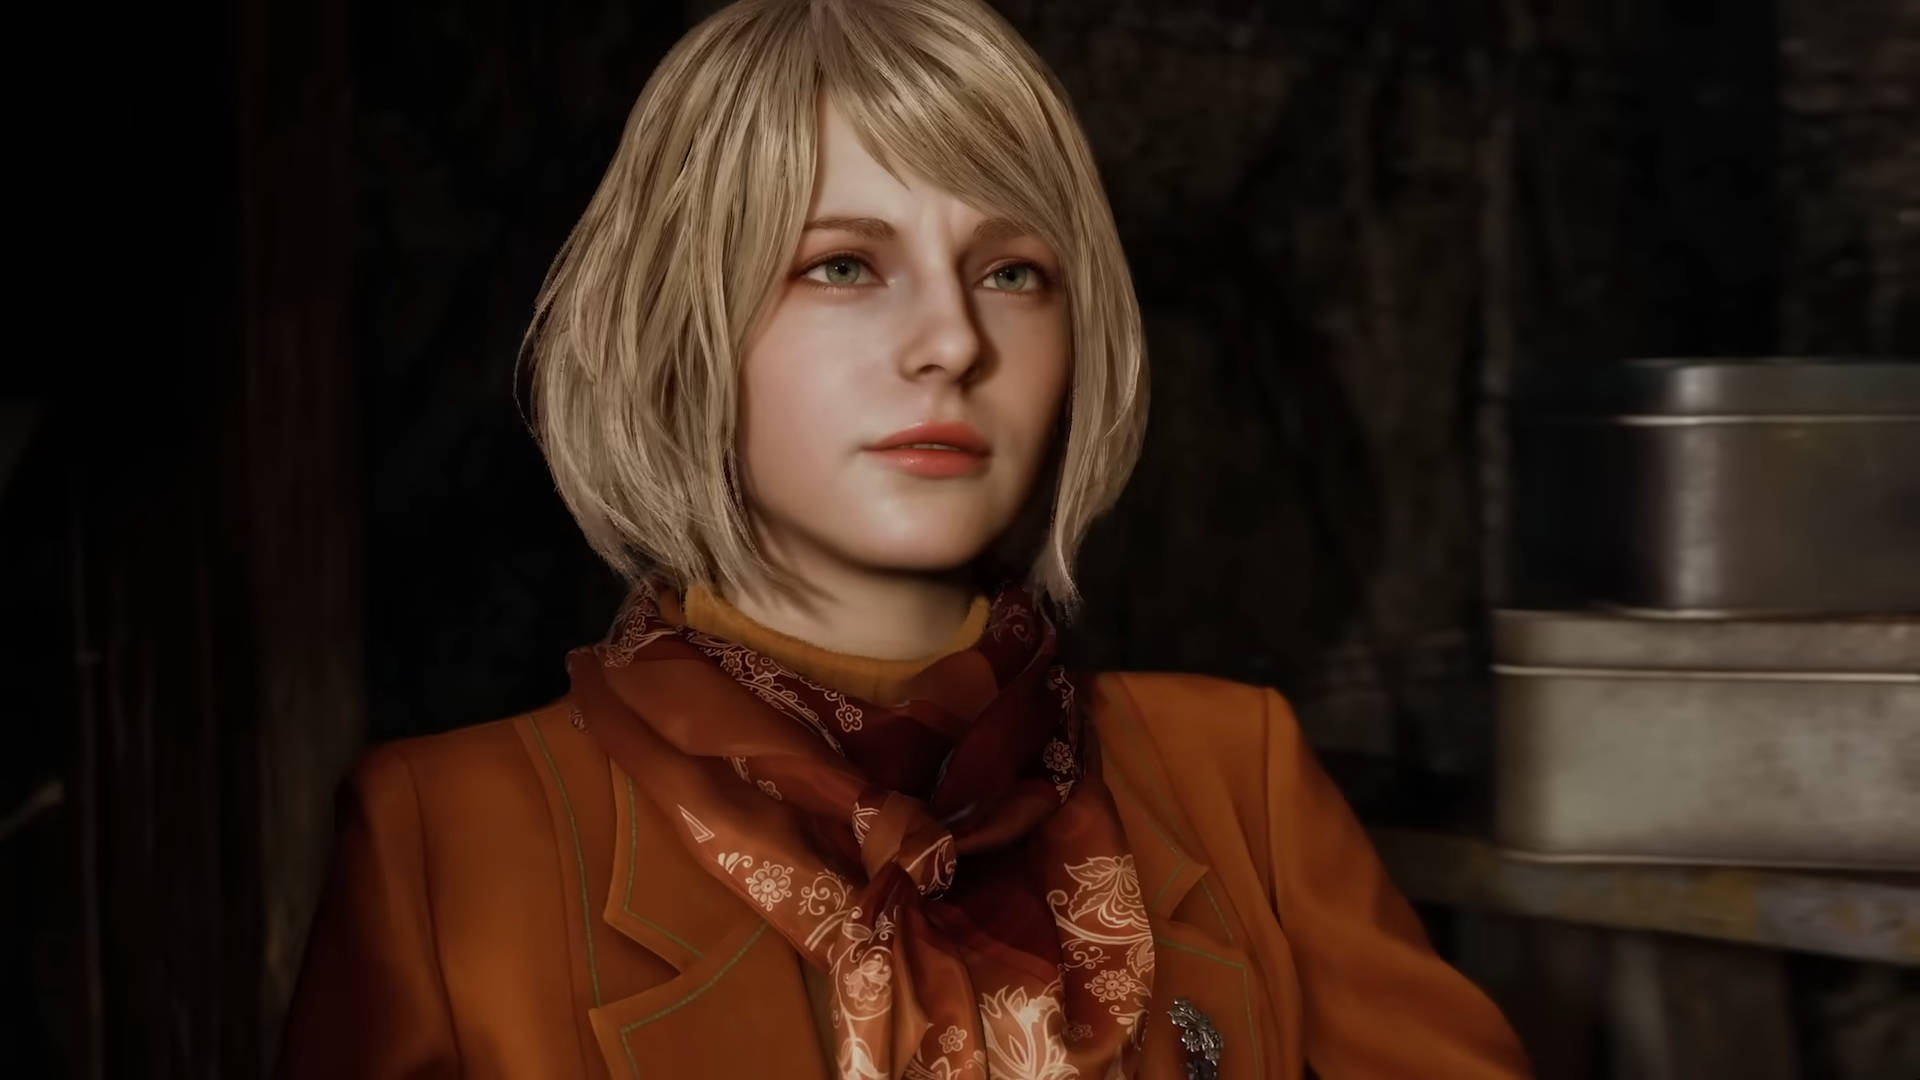 Deluxe edition skins for Ashley are now available in Resident Evil 4